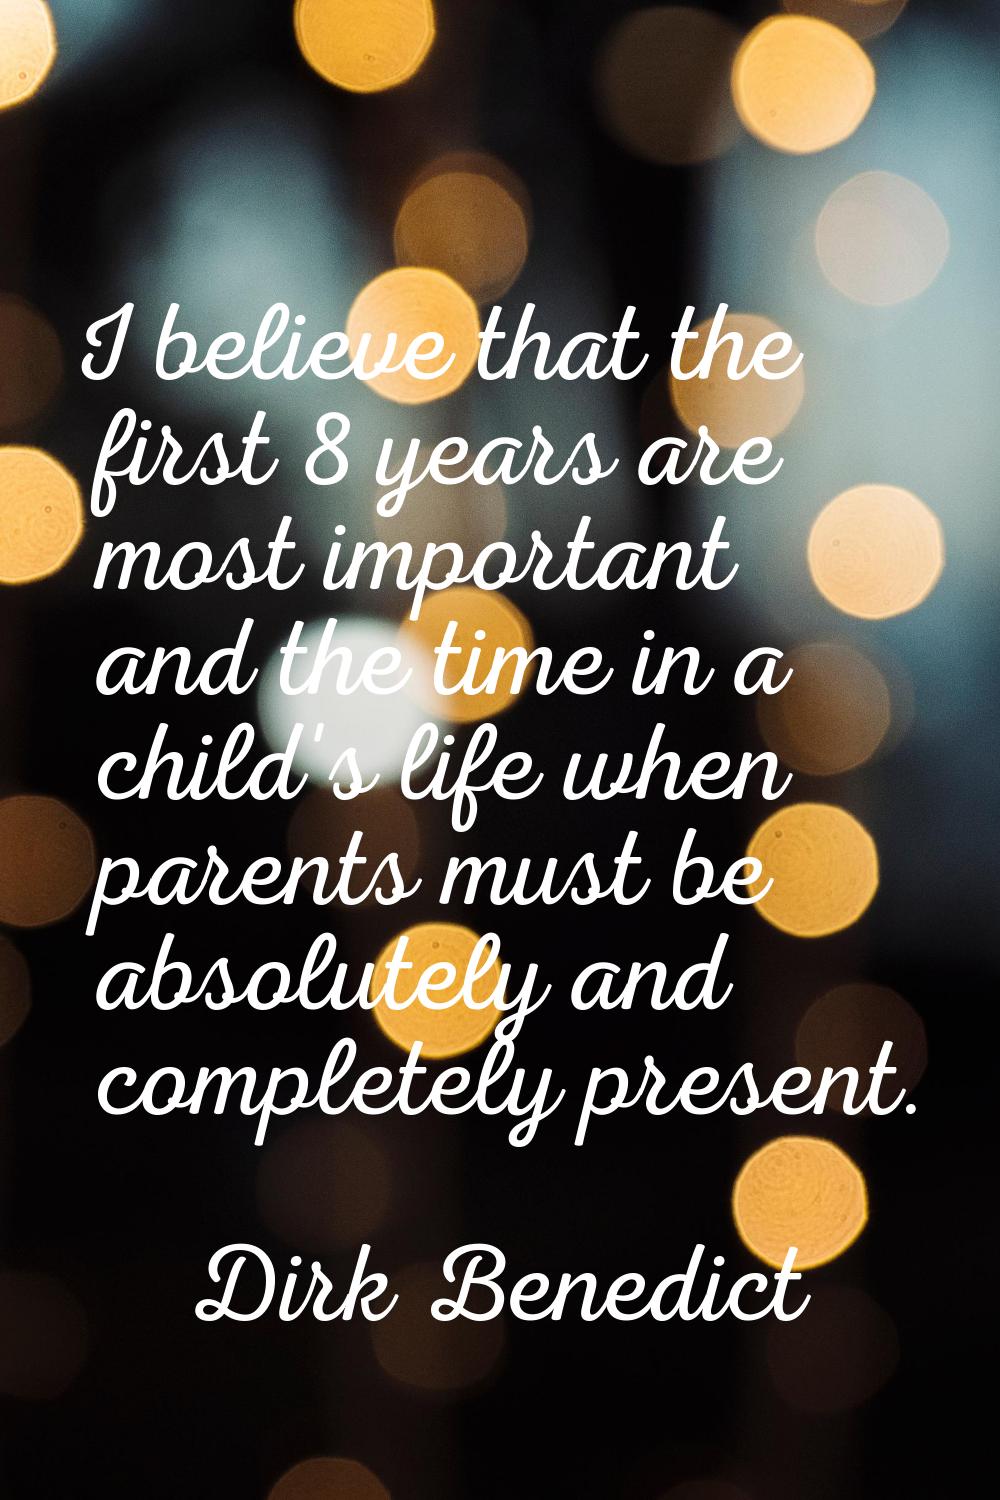 I believe that the first 8 years are most important and the time in a child's life when parents mus